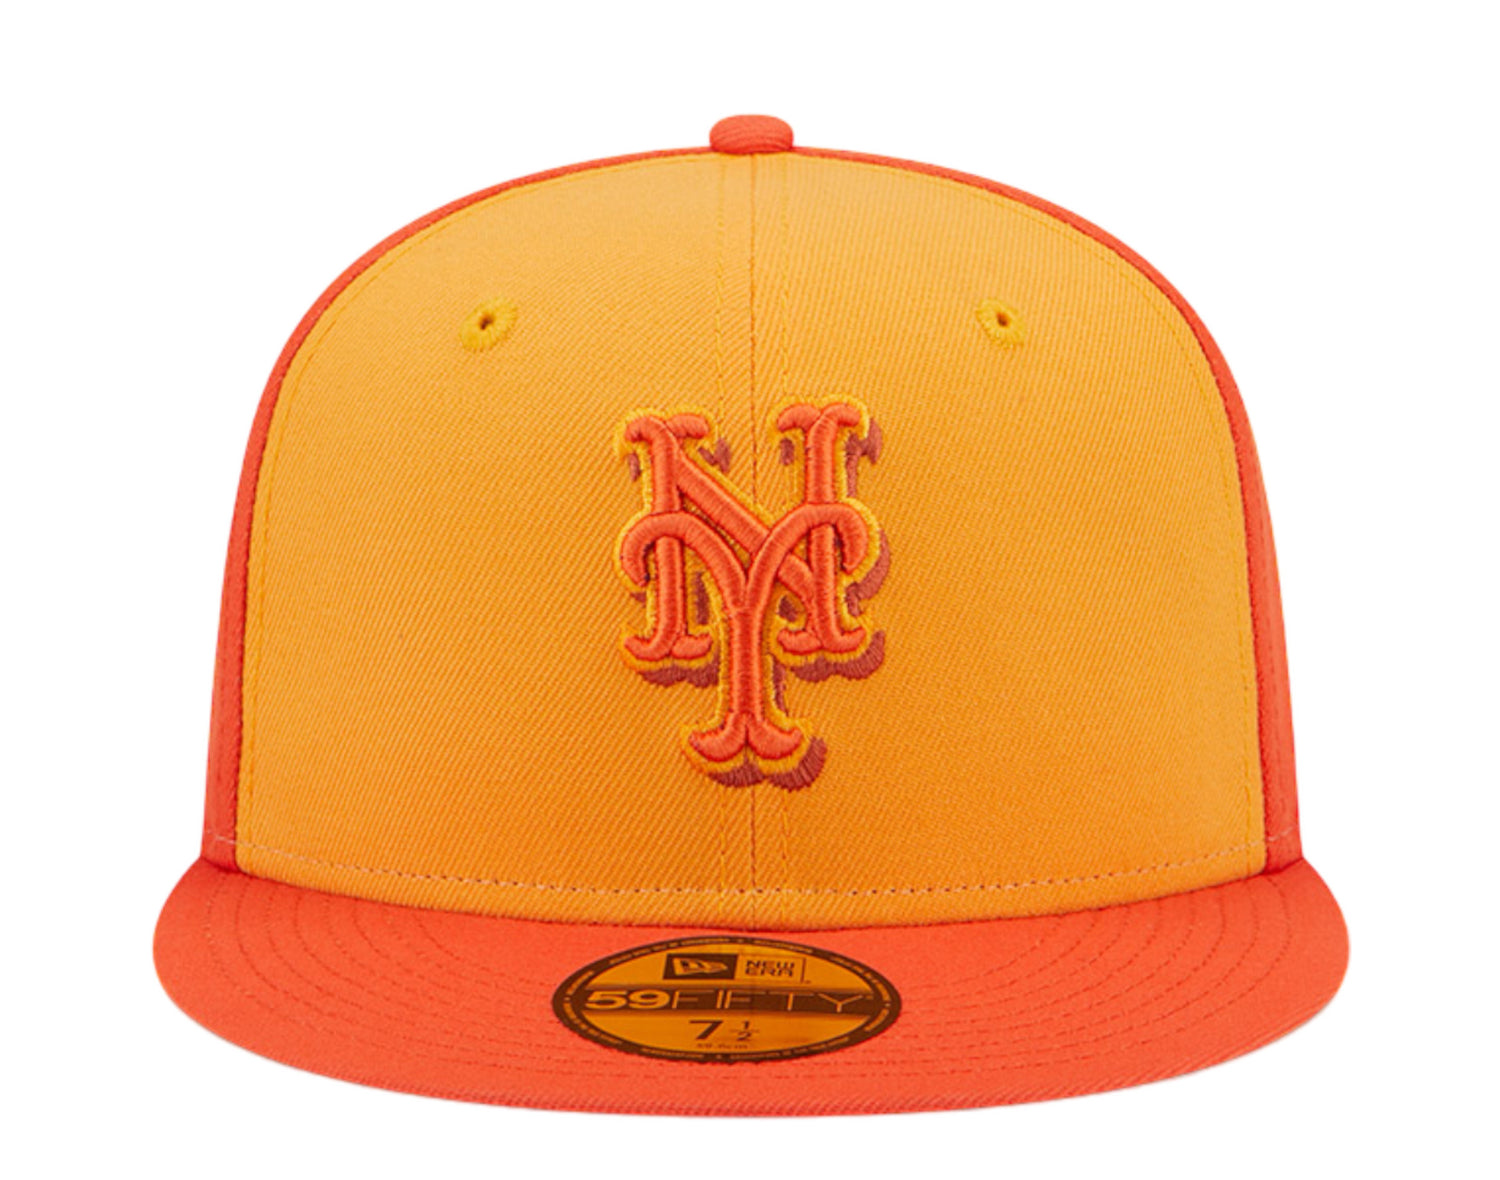 New Era 59Fifty MLB New York Mets Tri-Tone Team Fitted Hat